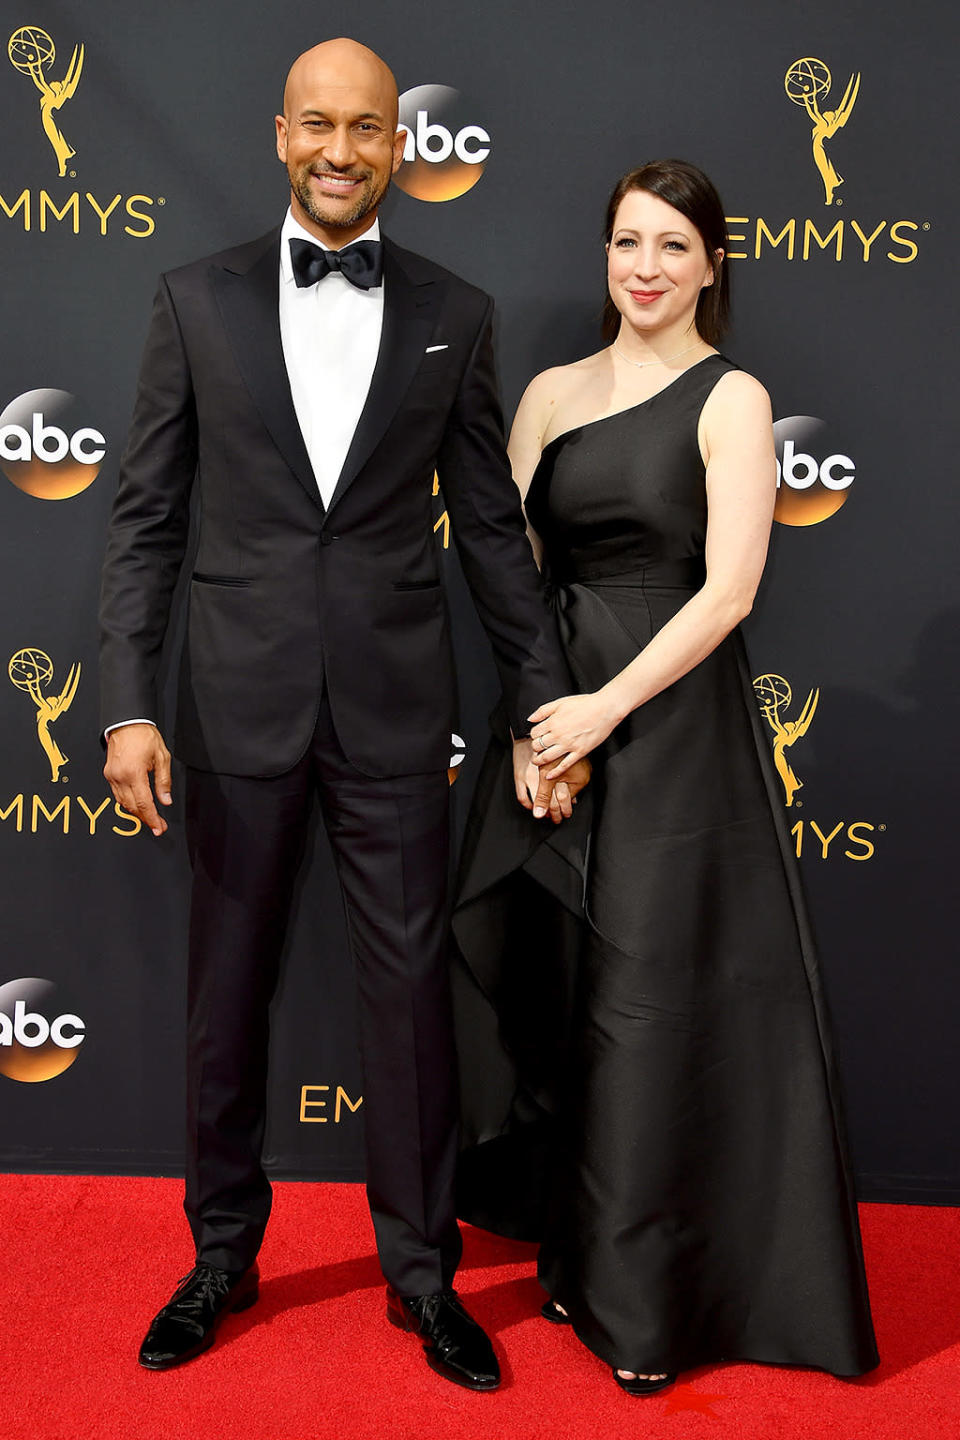 <p>Keegan-Michael Key and producer Elisa Pugliese arrive at the 68th Emmy Awards at the Microsoft Theater on September 18, 2016 in Los Angeles, Calif. (Photo by Getty Images)</p>